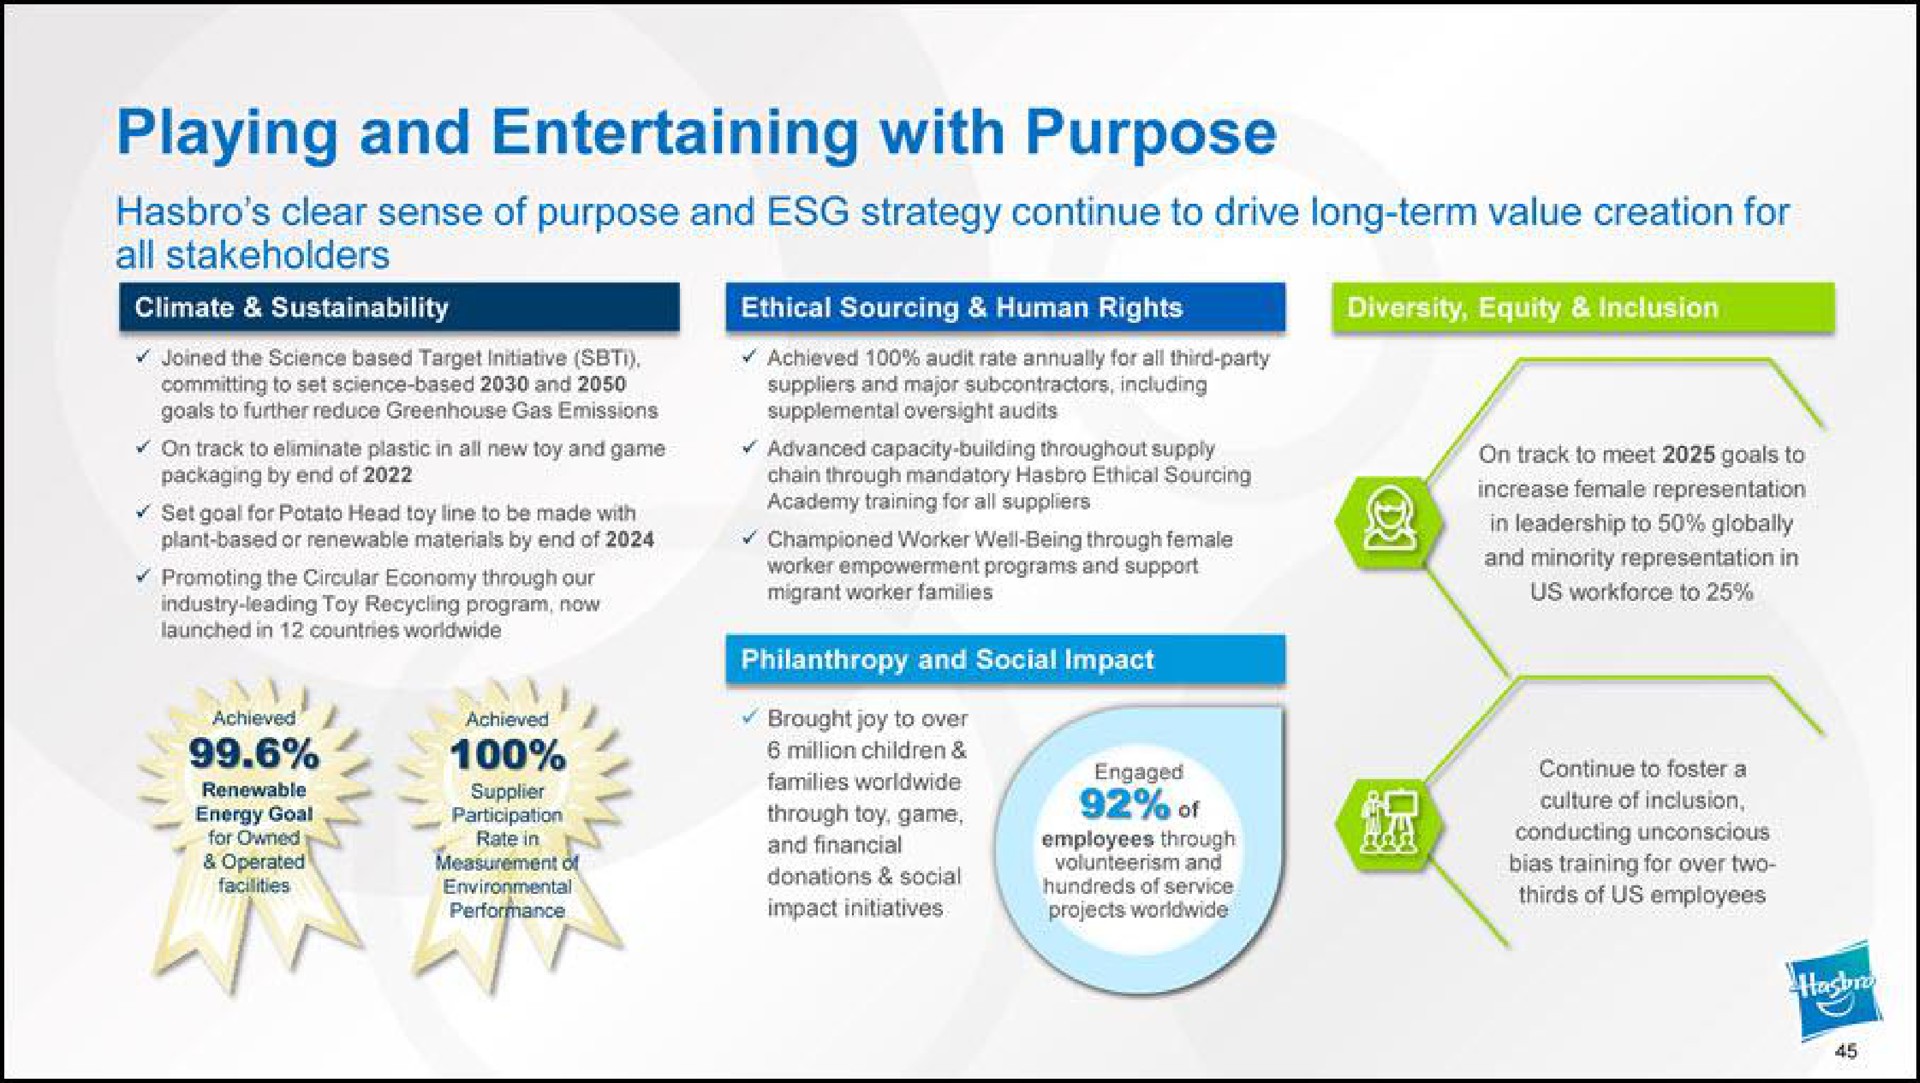 playing and entertaining with purpose clear sense of purpose and strategy continue to drive long term value creation for all stakeholders | Hasbro